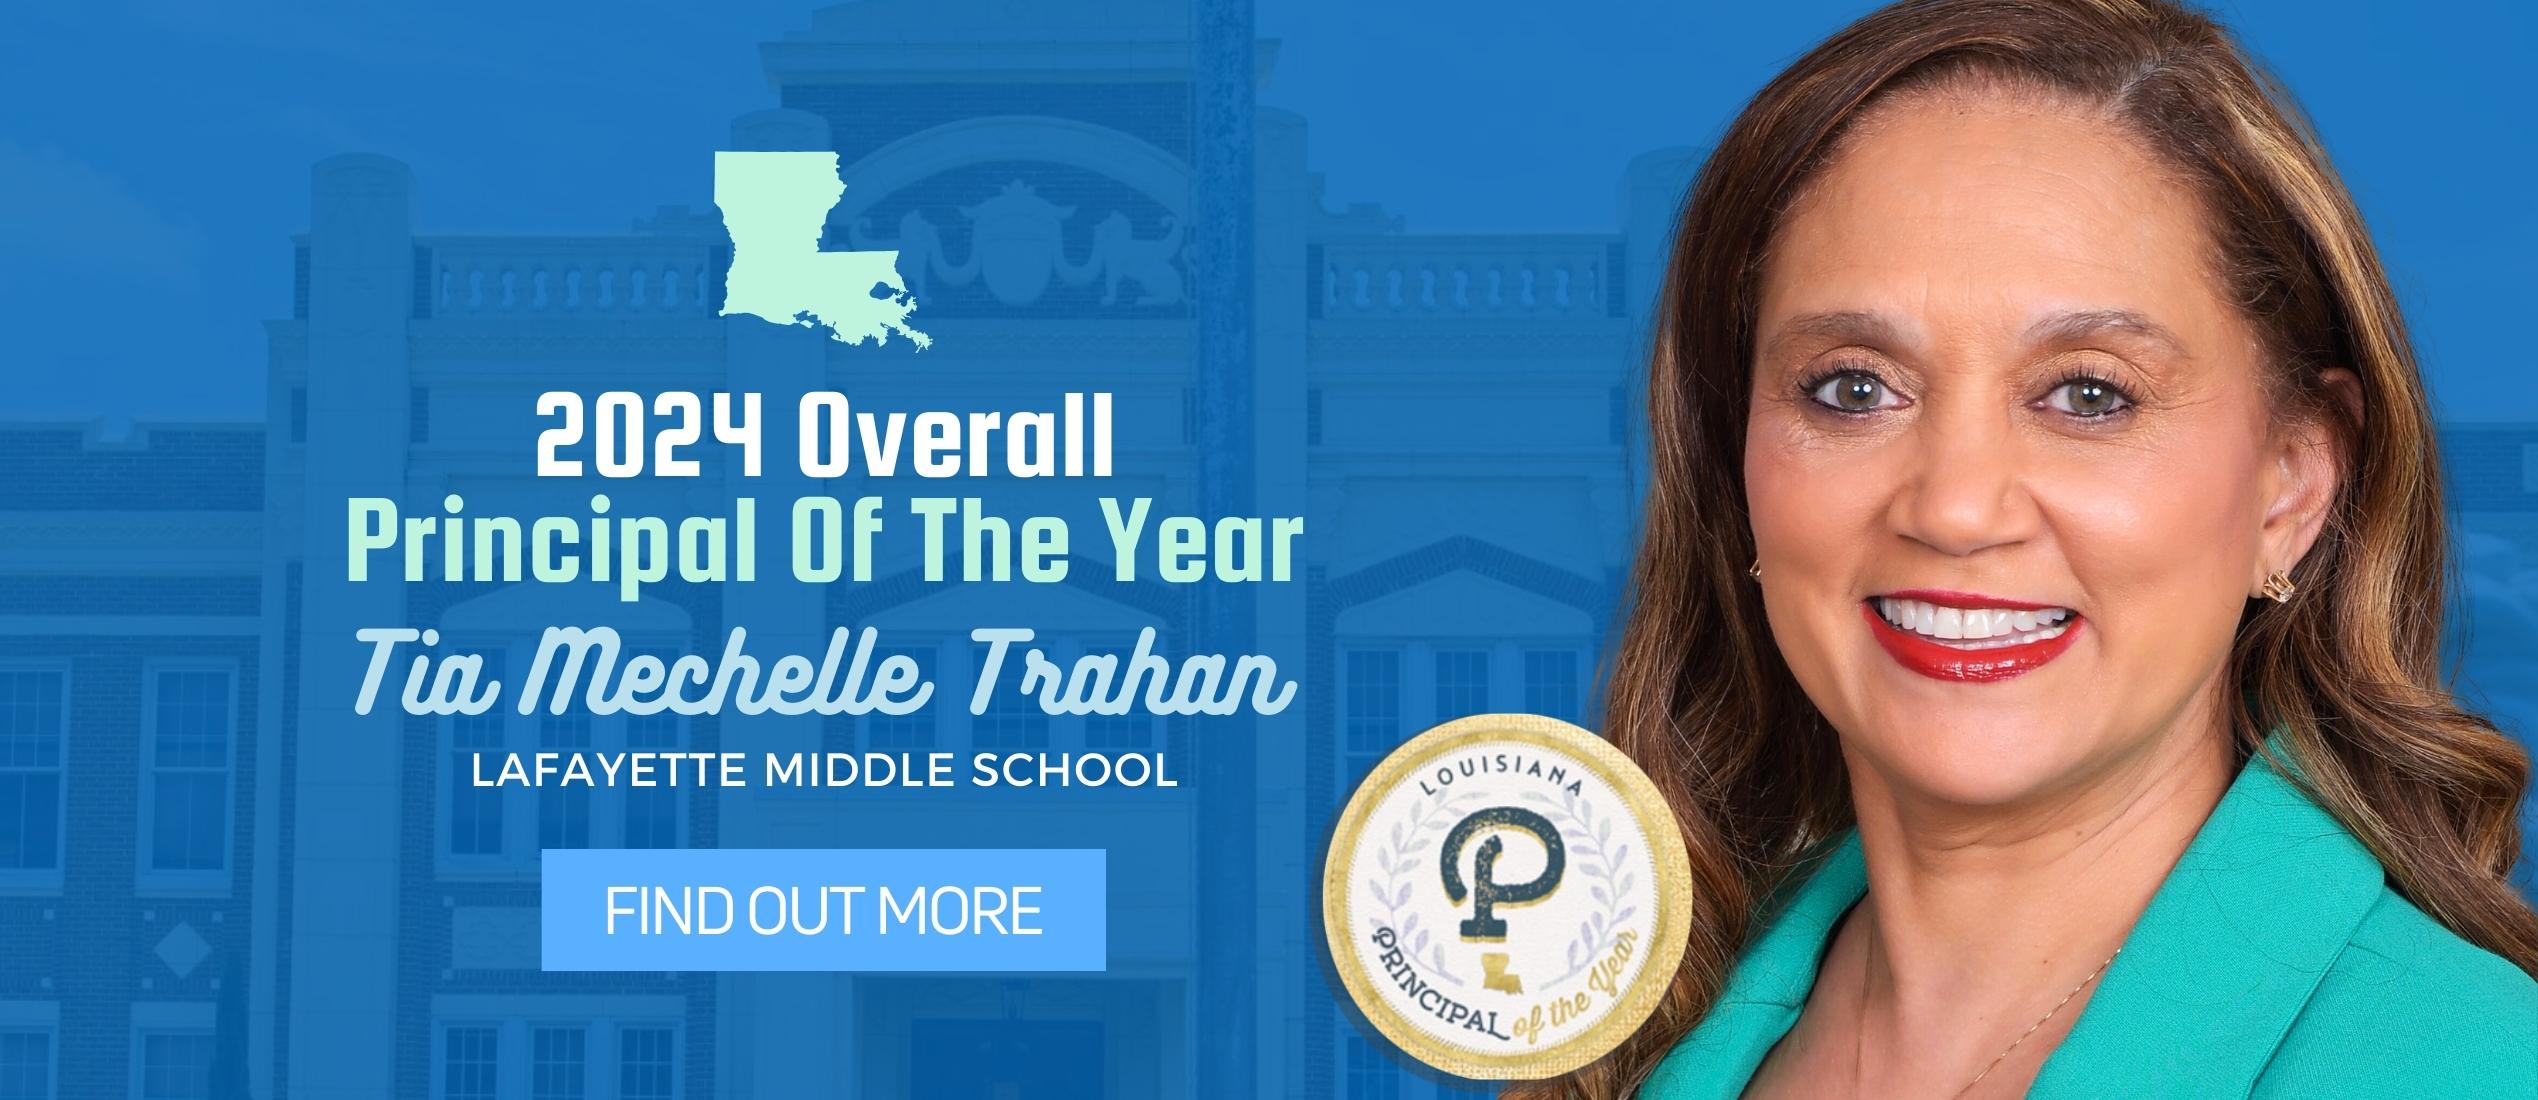 Tia Trahan Louisiana Department Of Education 2024 Overall Principal Of The Year Lafayette Middle School 